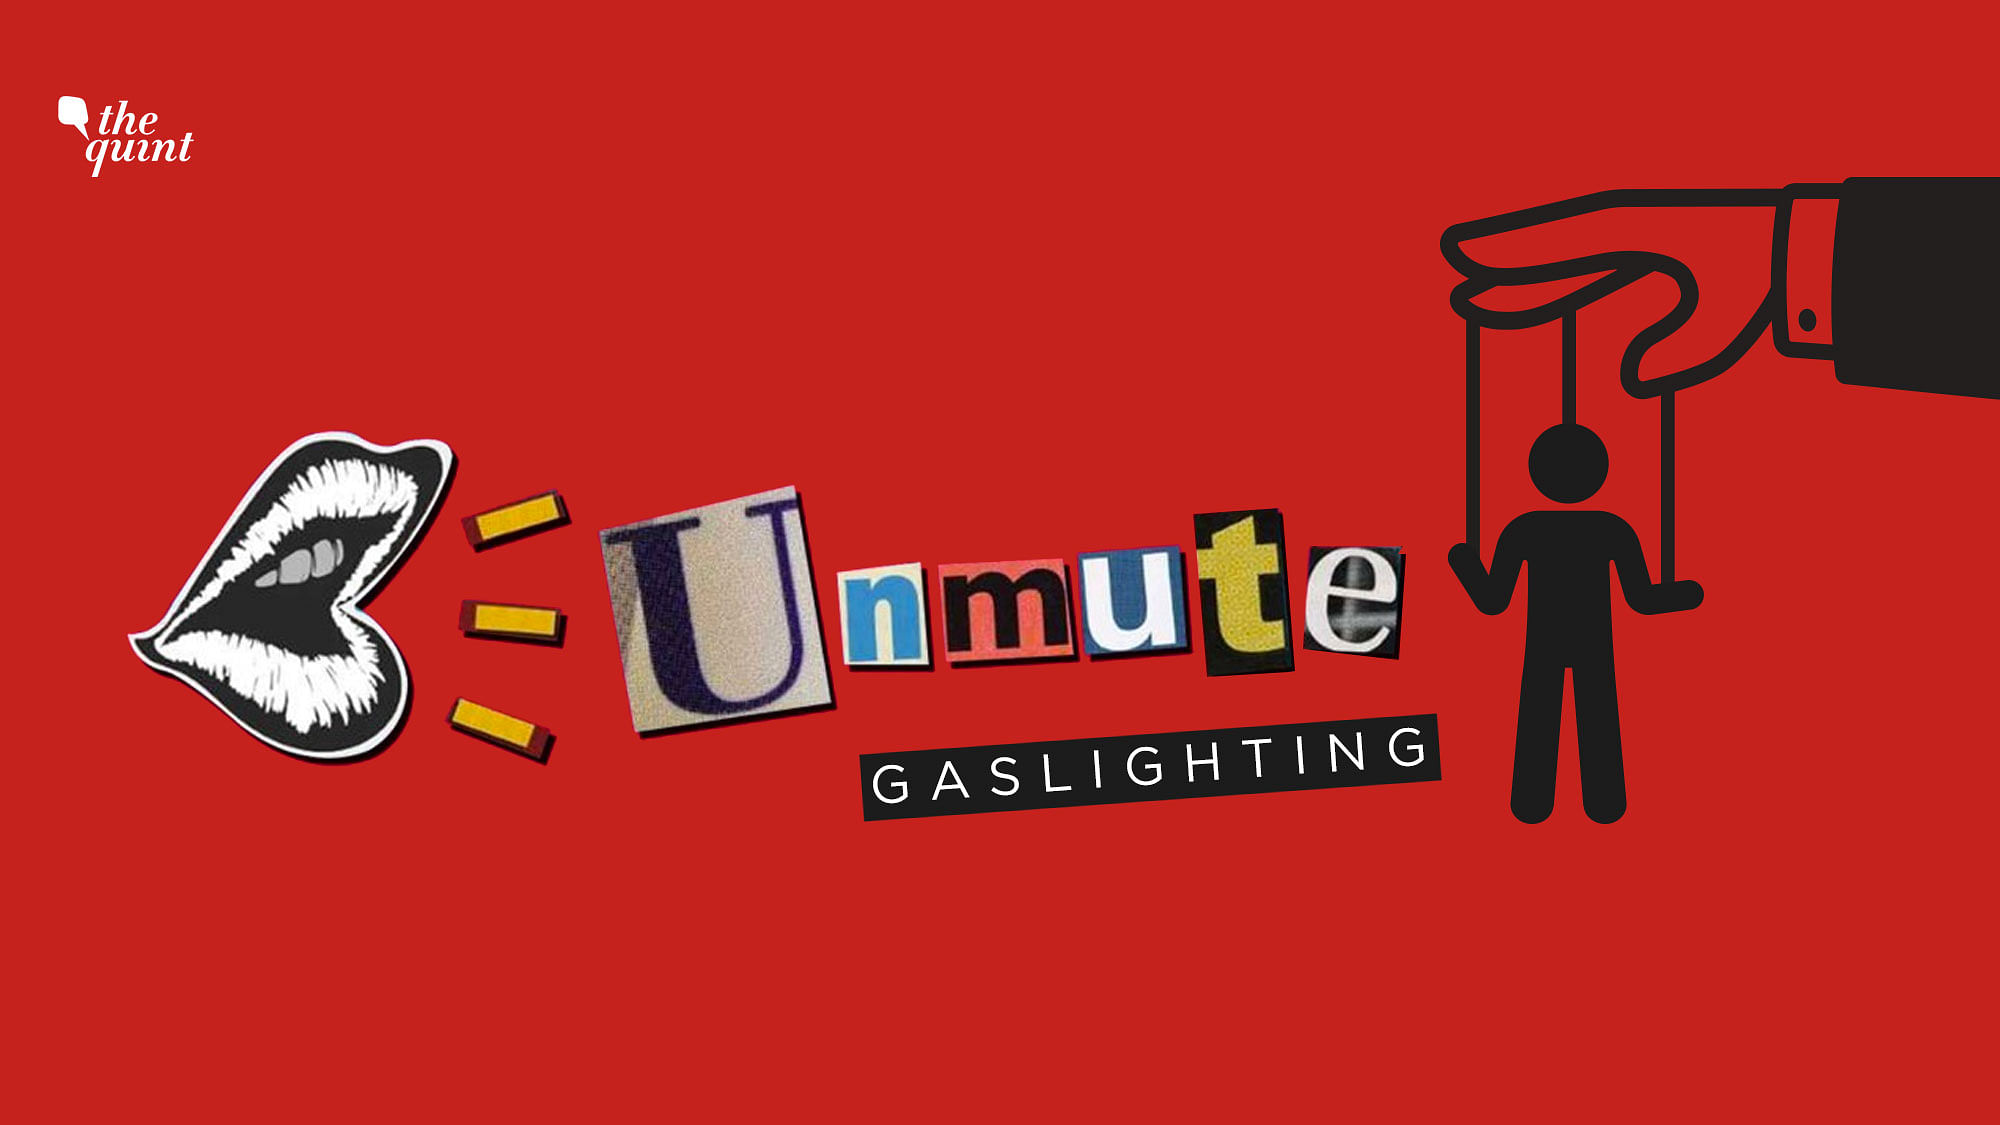 In this episode of Unmute, two women who were muted by gaslighting in their personal relationships speak out about their experiences.